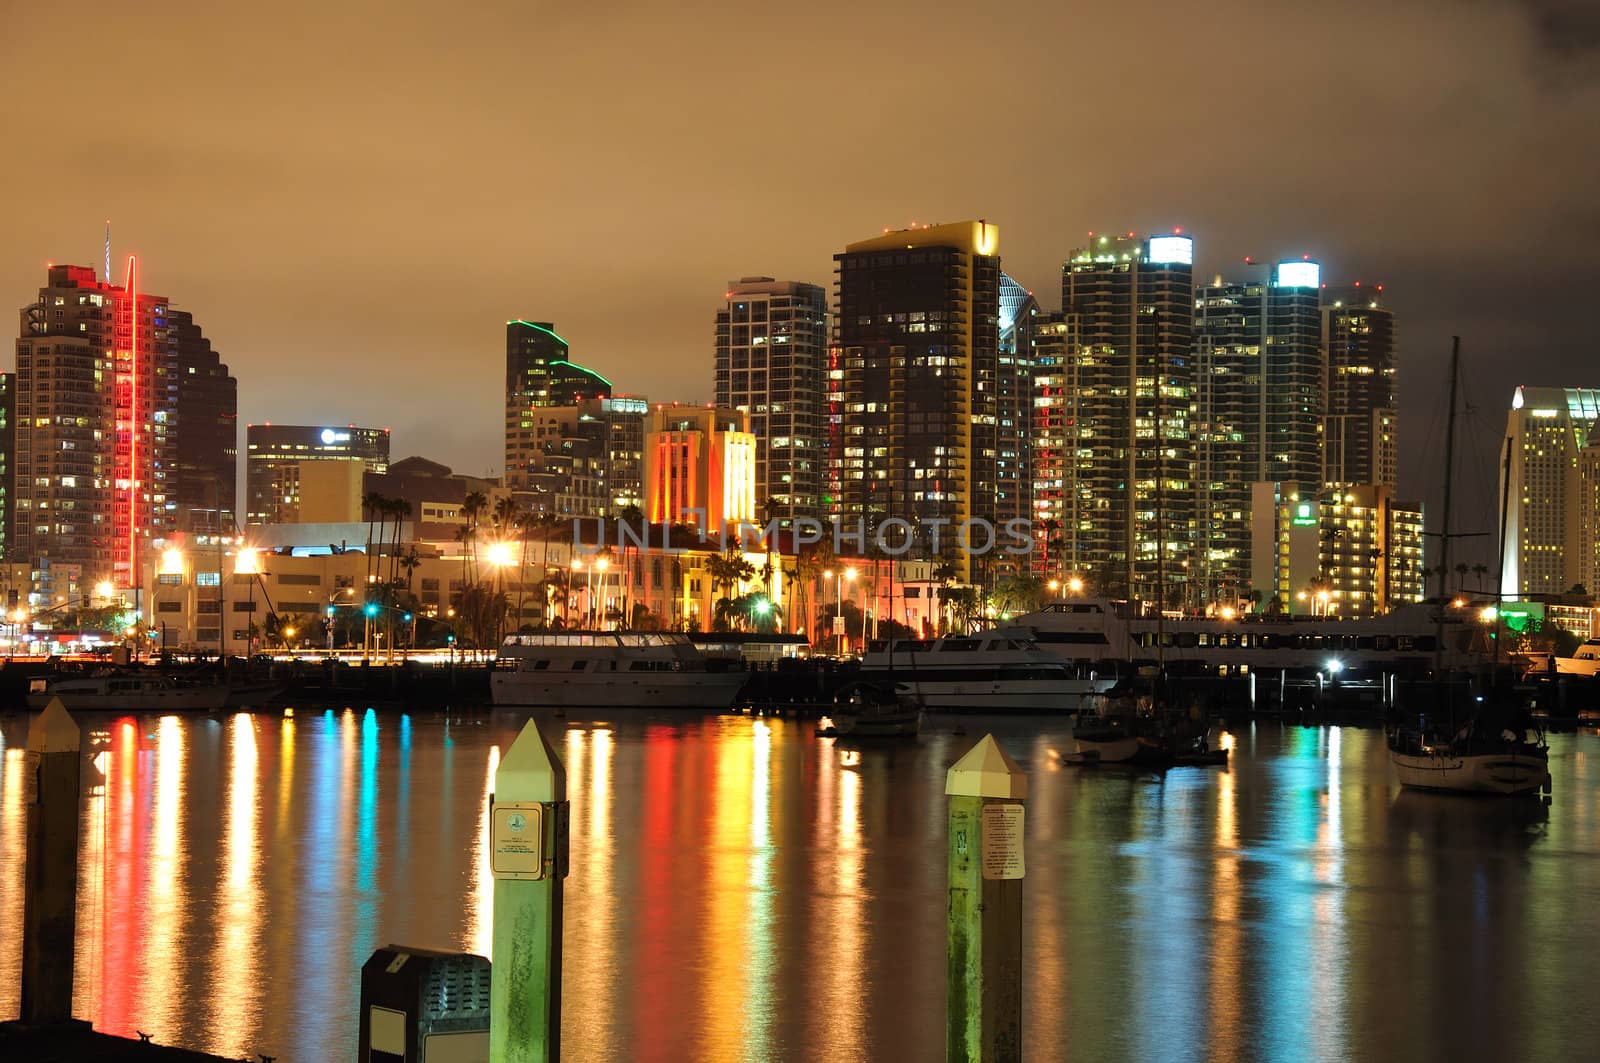 Lights from downtown towers reflect in the calm water of San Diego Bay in Southern California.